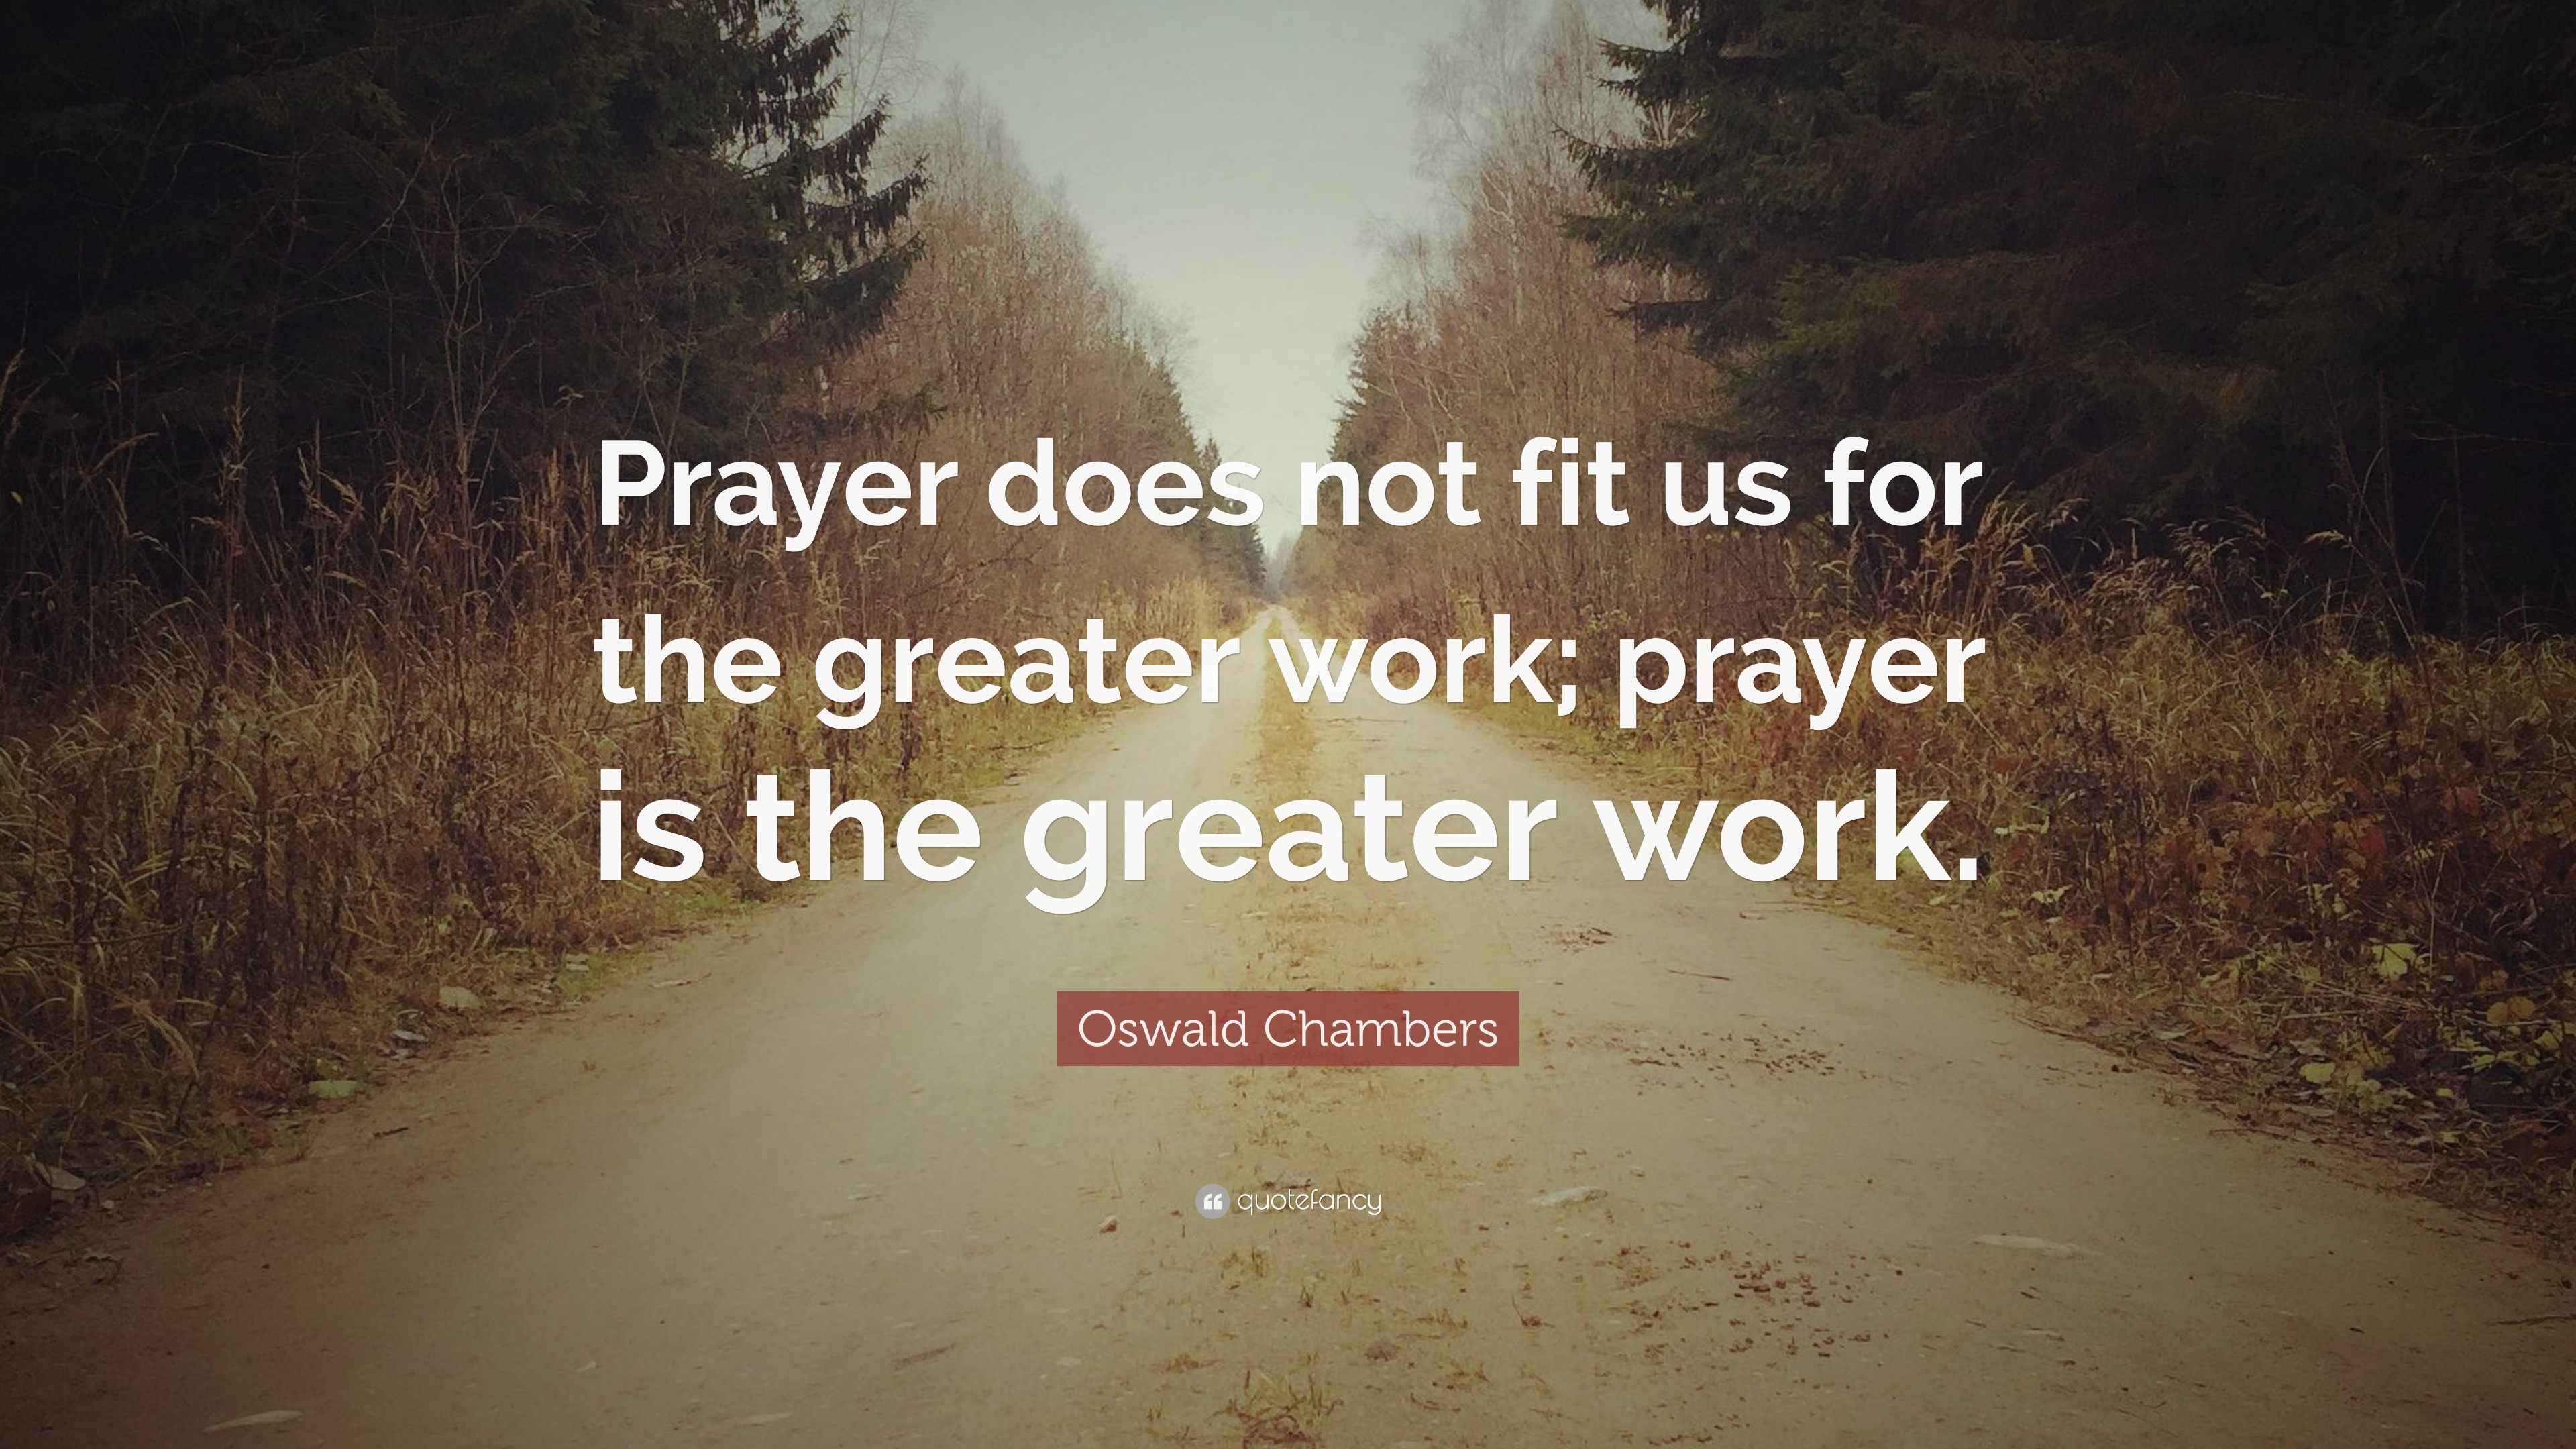 Oswald Chambers Quote “Prayer does not fit us for the